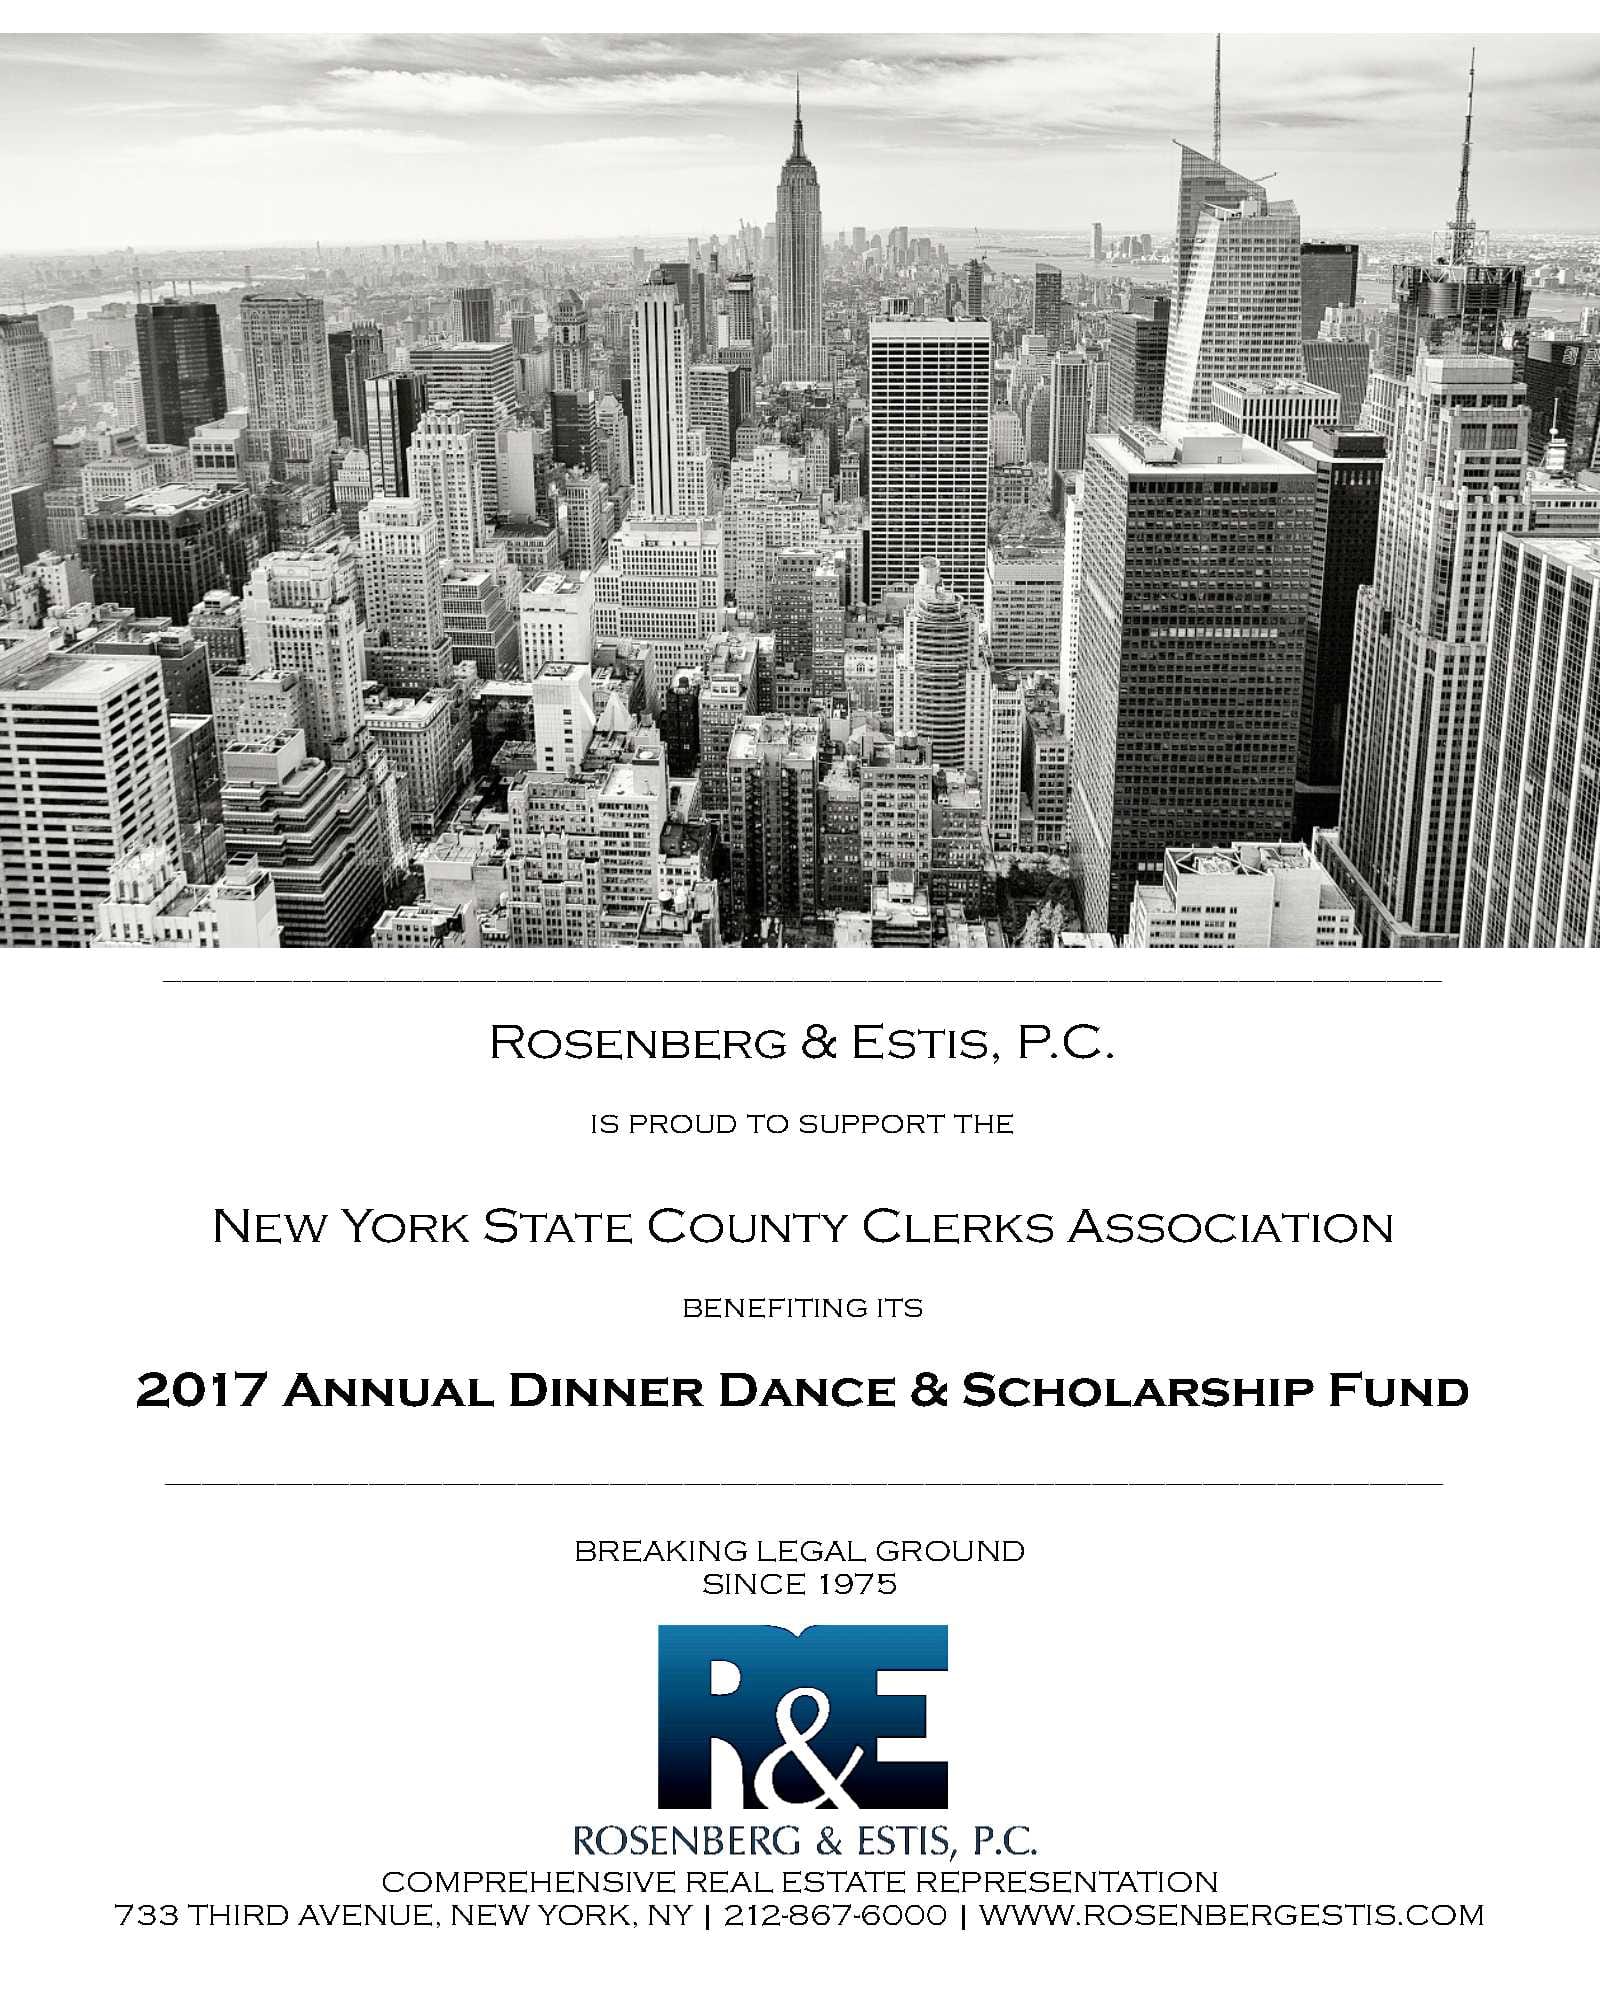 Rosenburg & Estis, P.C. is proud to support the NYSCCA Benefitting Its 2017 Annual Dinner Dance & Scholarship Fund 